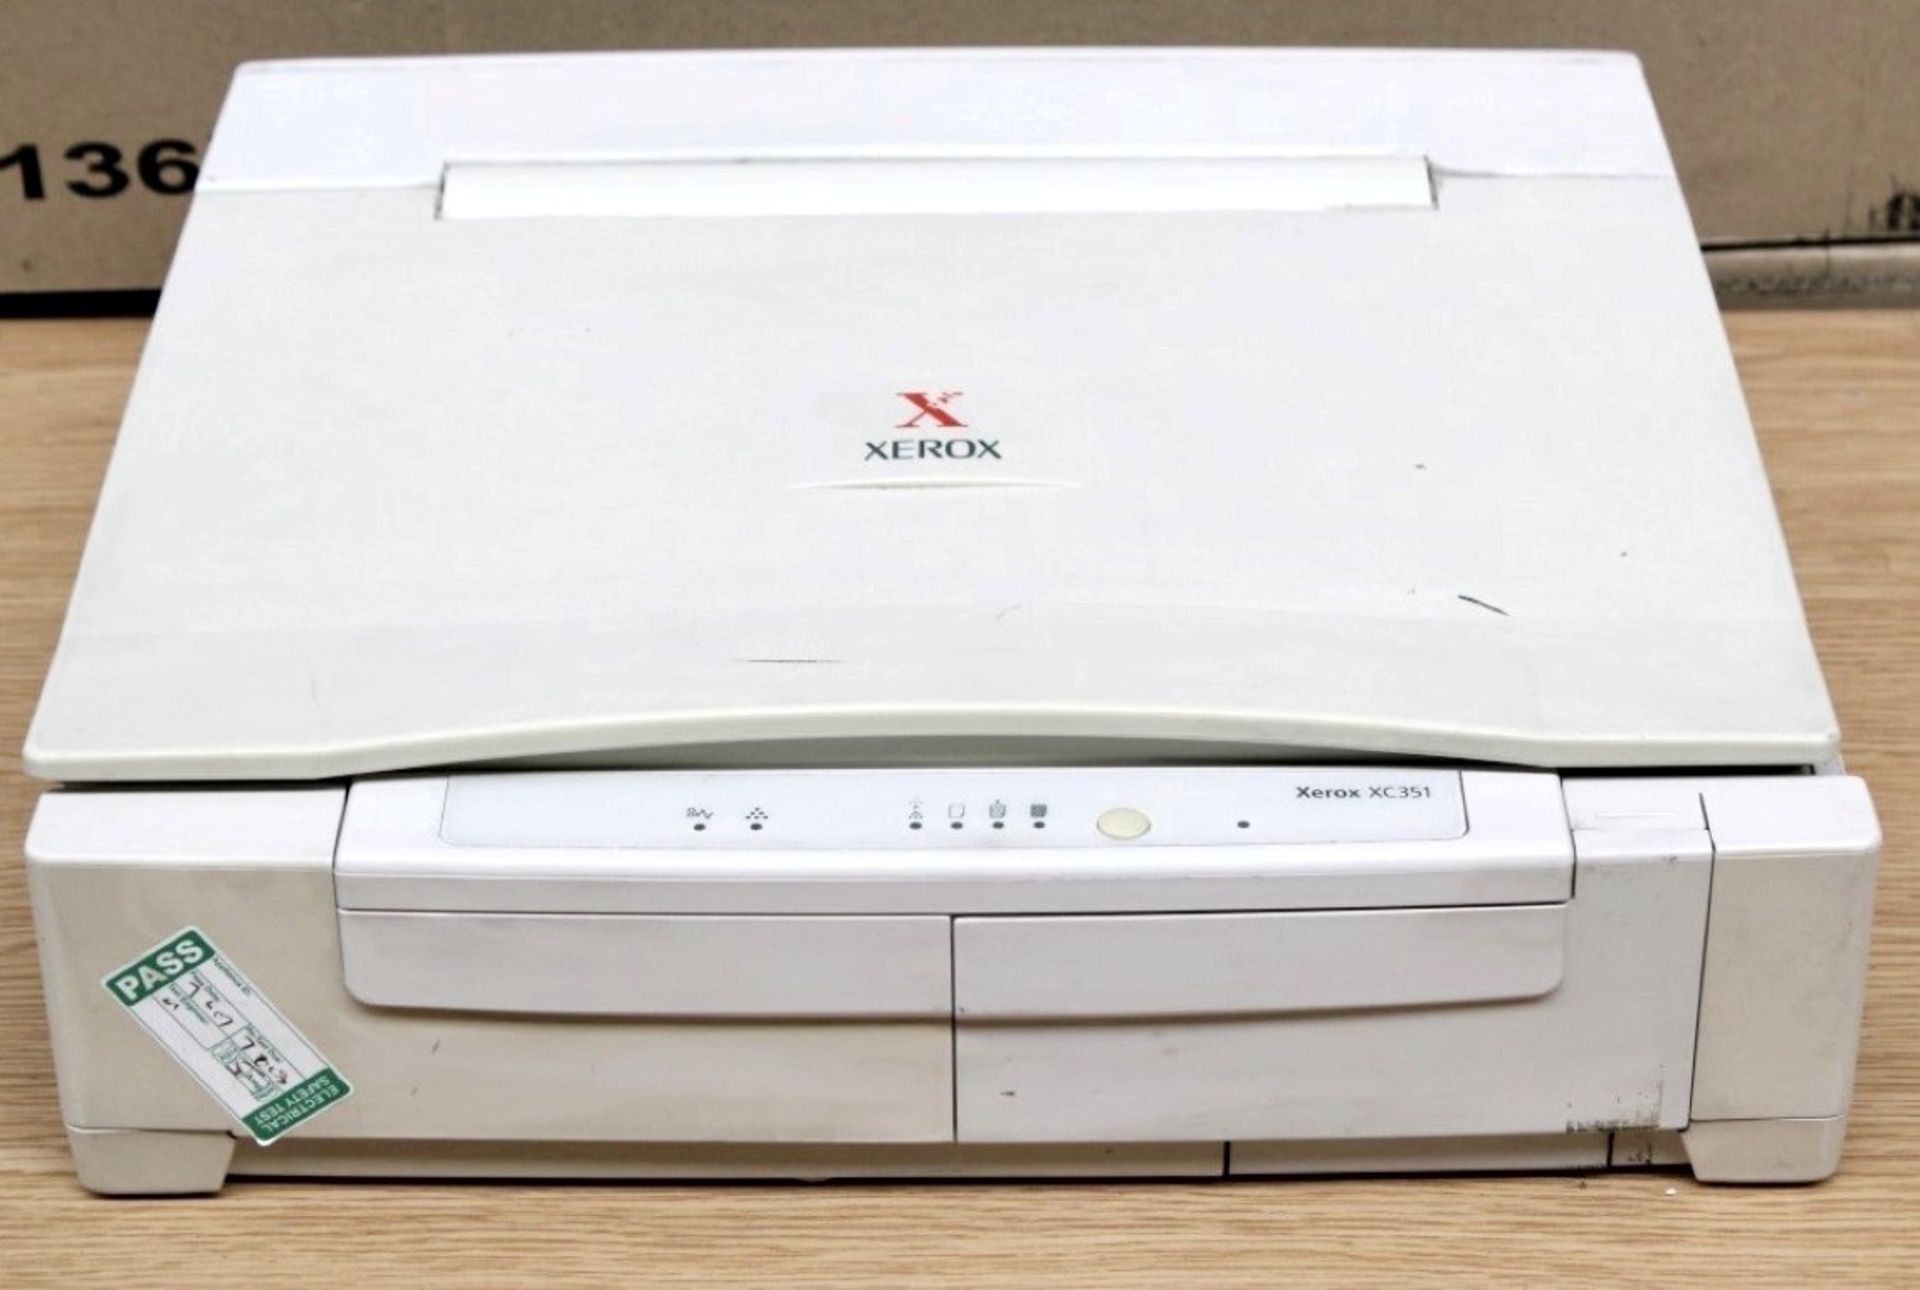 1 x Xeros XC351 Office Scanner – Preowned / Untested, No Leads Included - Ref: AL104 - CL107 –